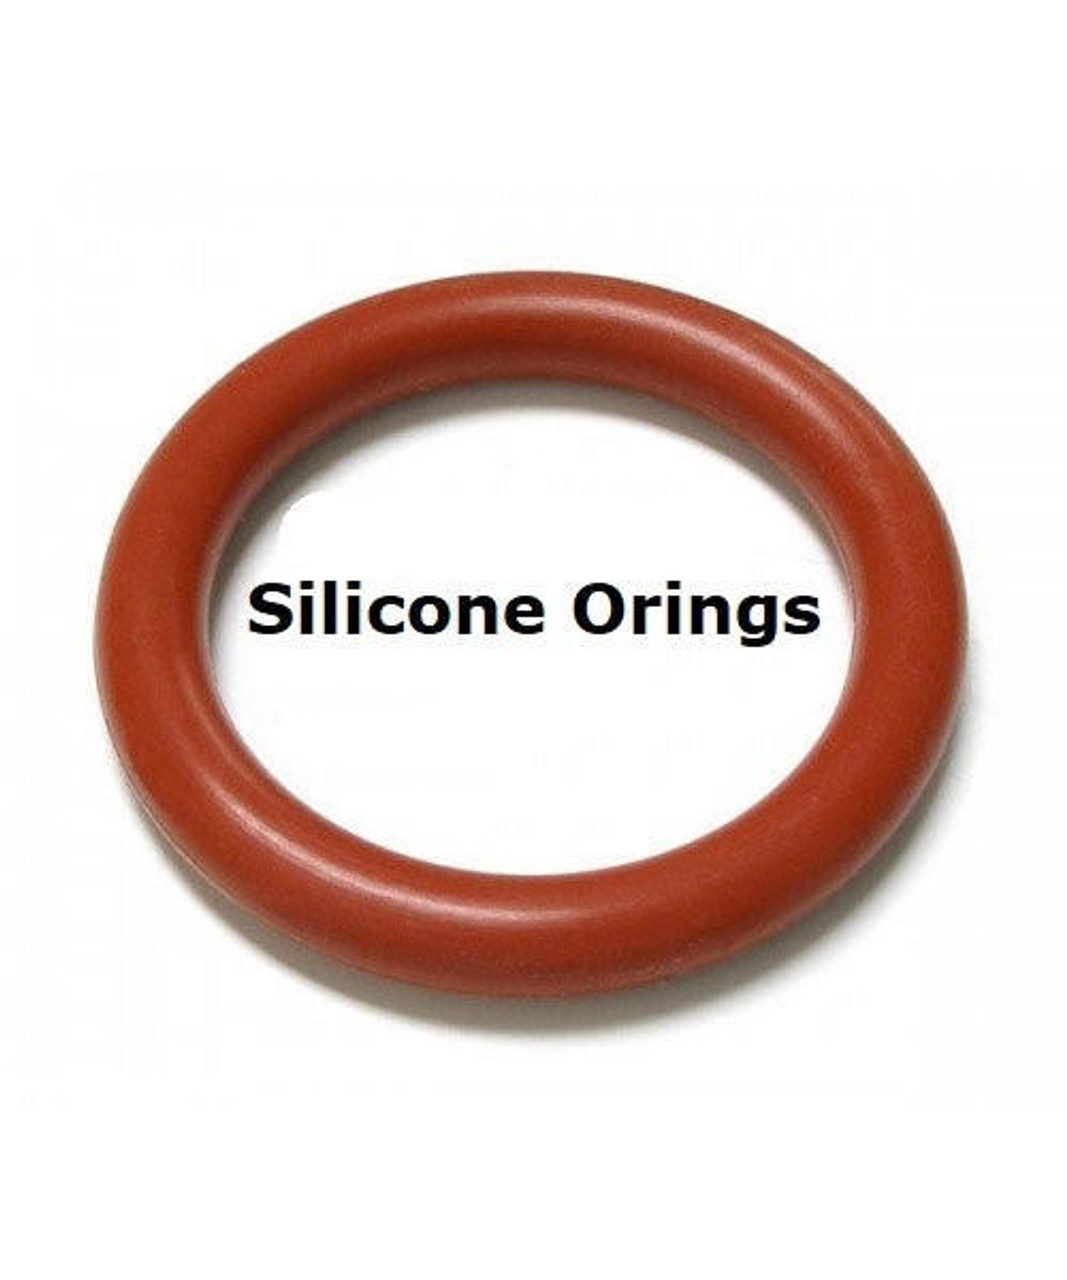 Silicone O-rings Size 347 Price for 1 pc